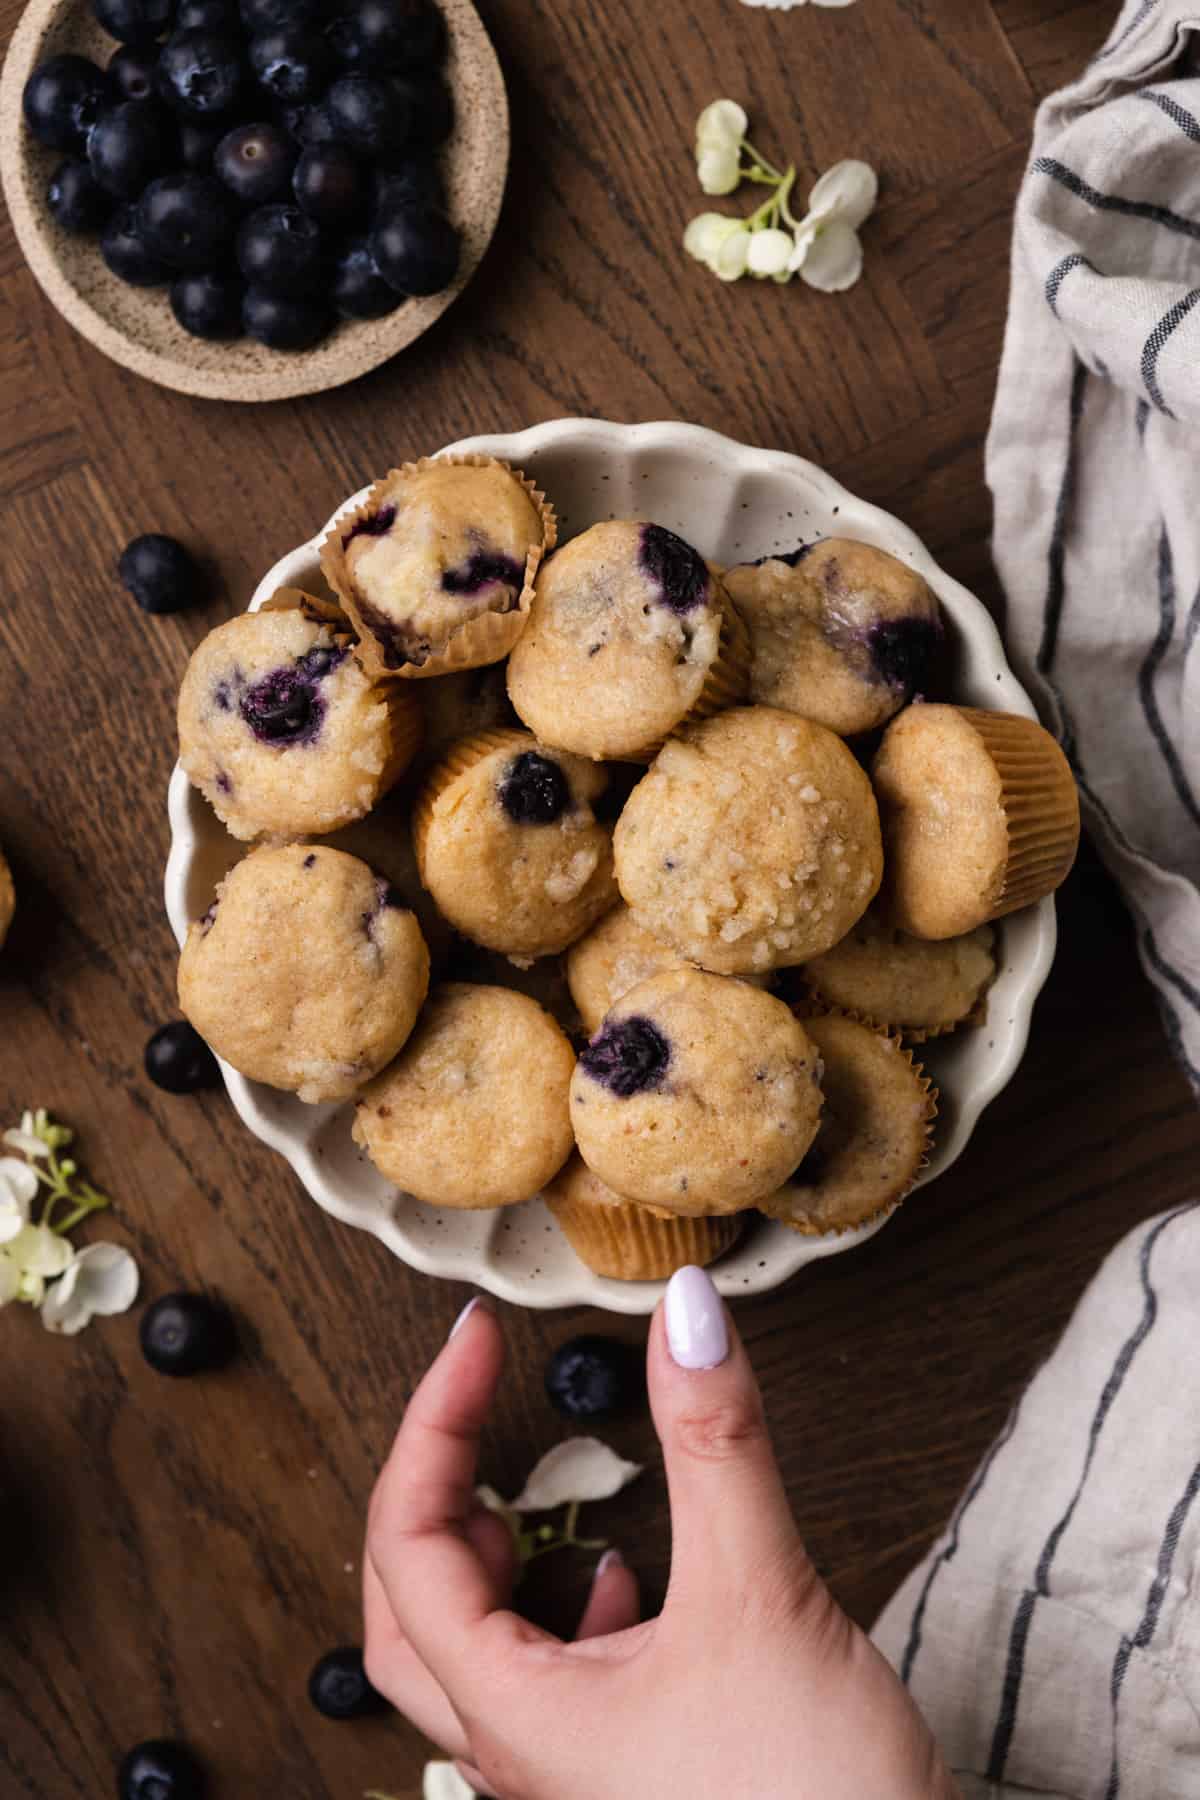 A bowl of mini blueberry muffins with a hand reaching for one.